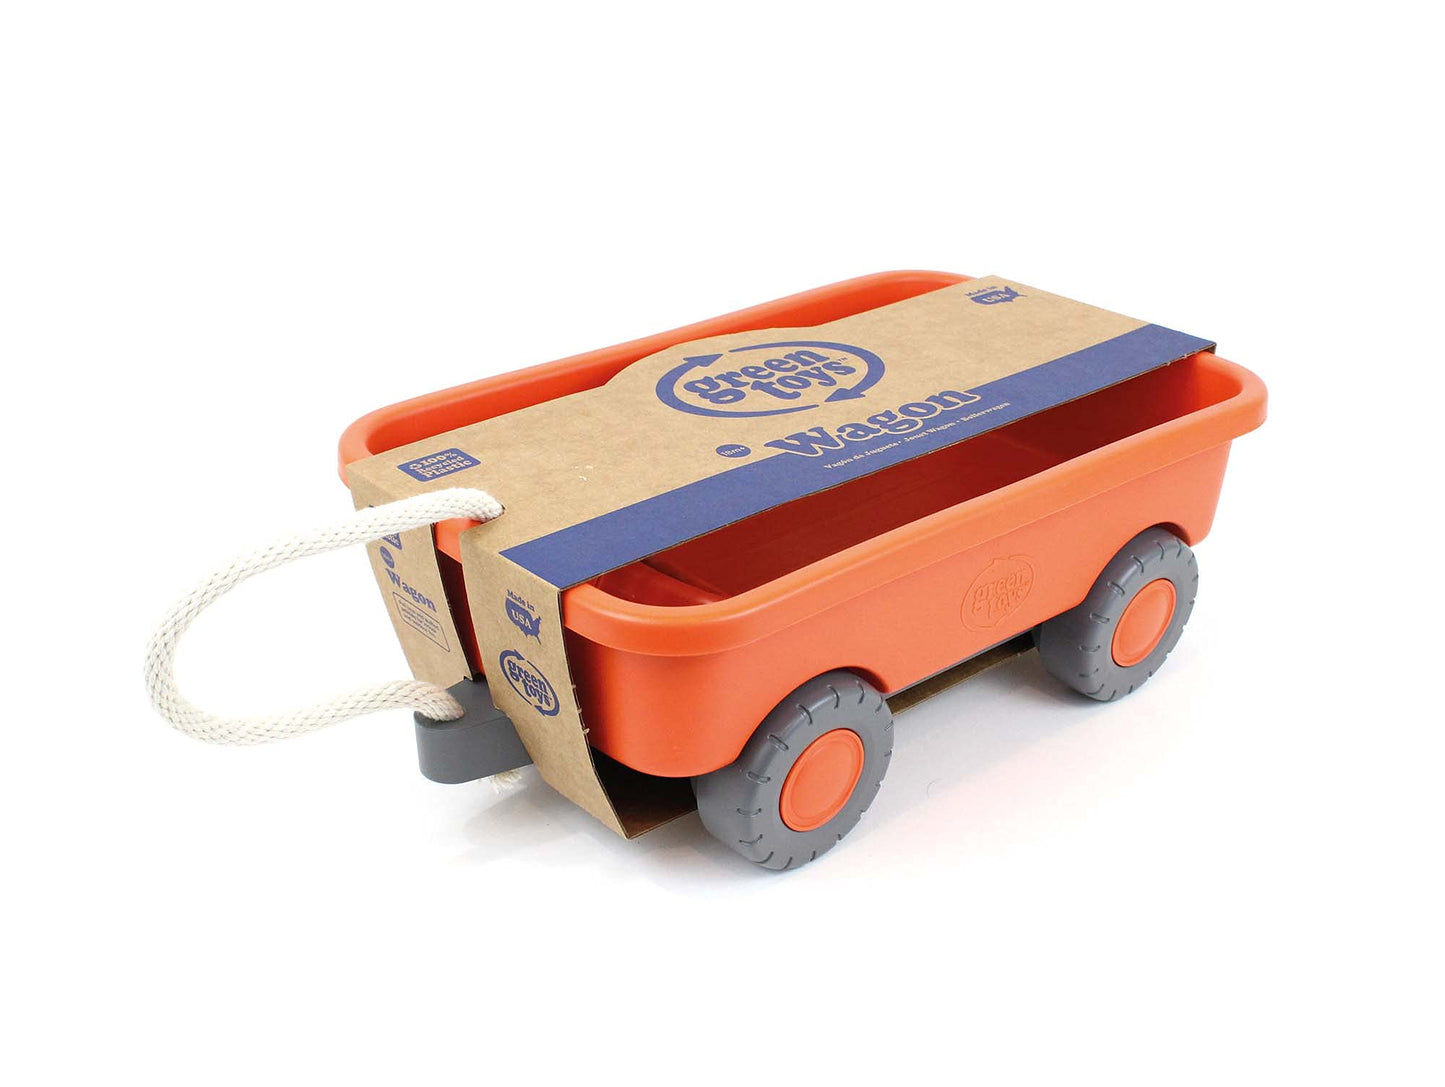 Orange - Pretend Play, Motor Skills, Kids Outdoor Toy Vehicle. No BPA, phthalates, PVC. Dishwasher Safe, Recycled Plastic, Made in USA.